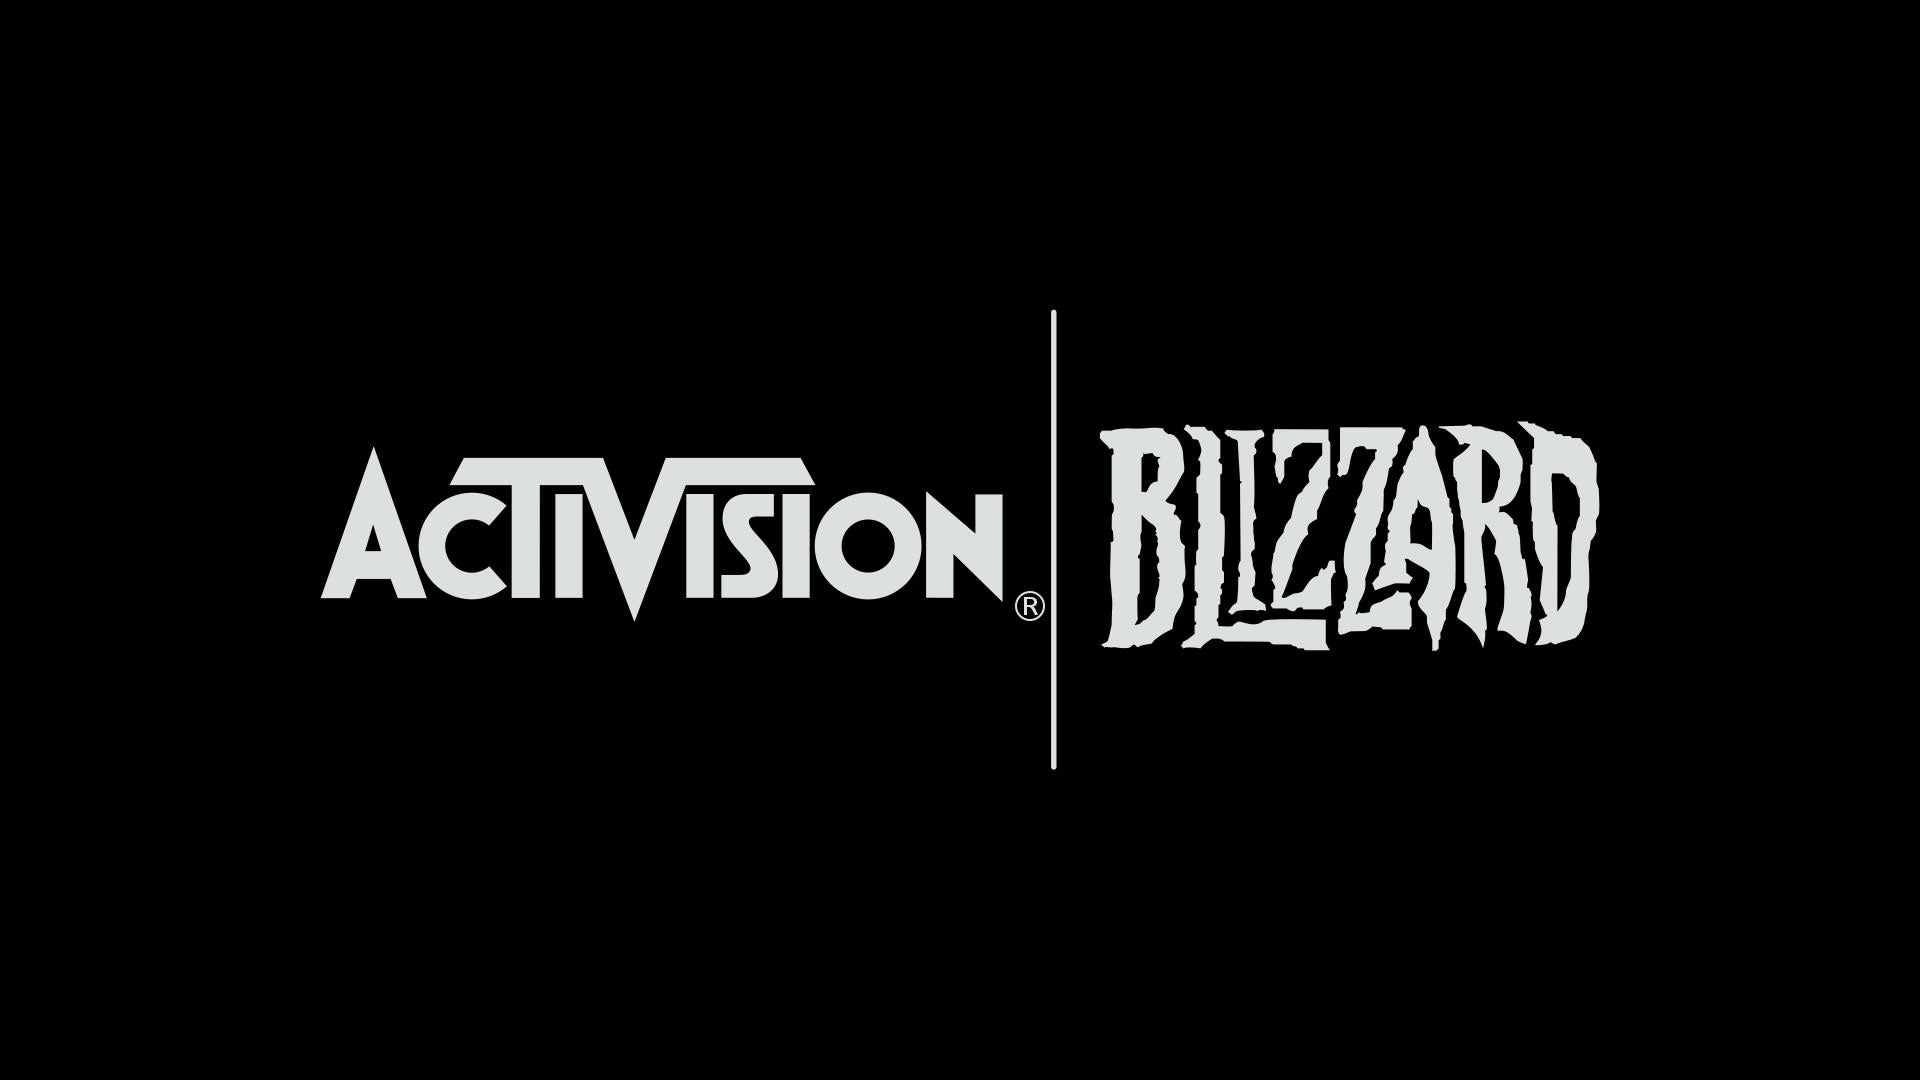 Image for Activision held back damning numbers about workplace misconduct - report